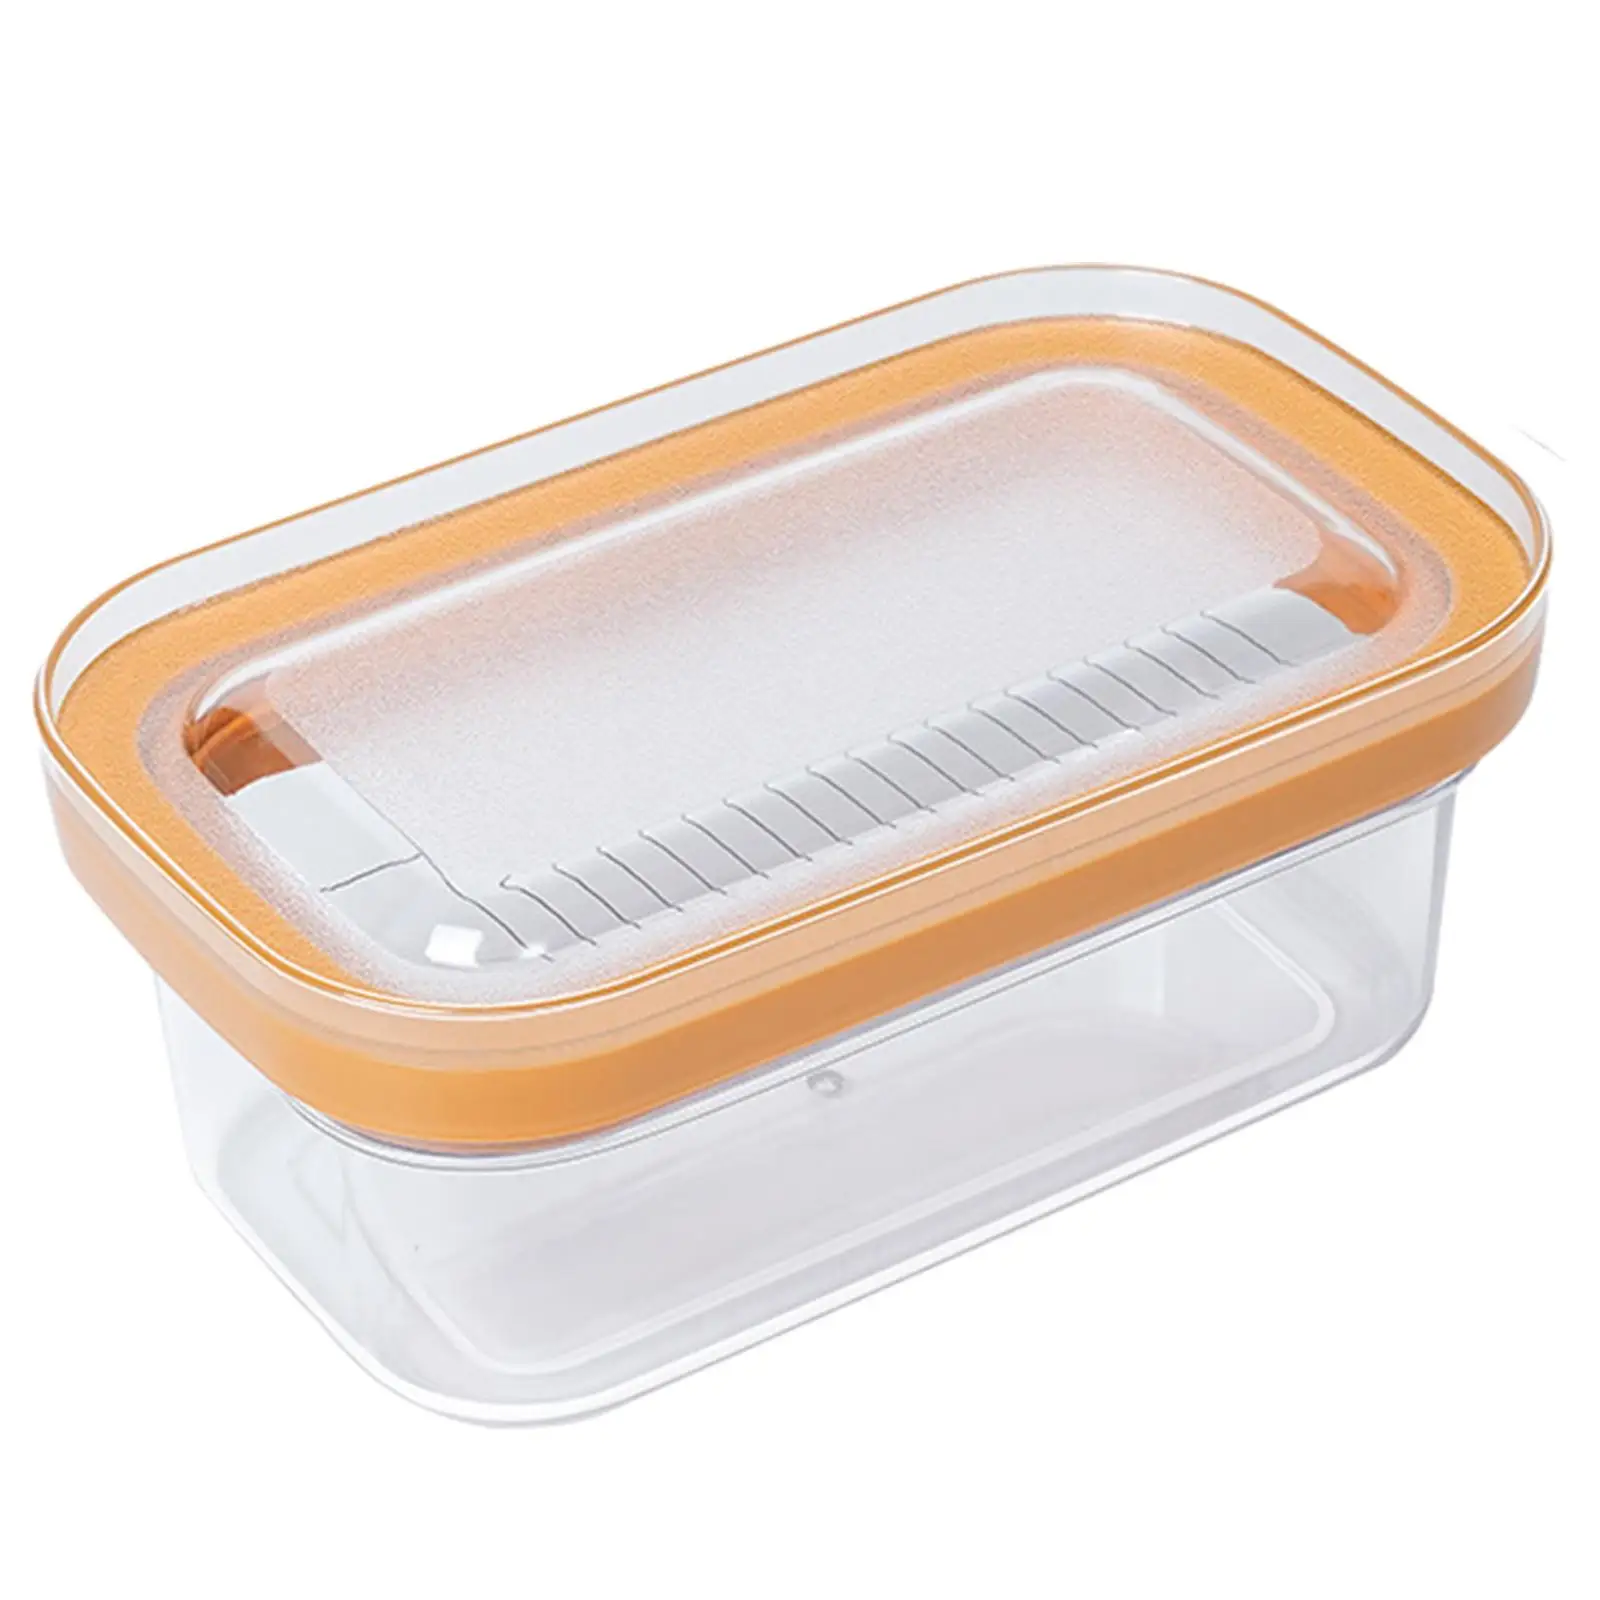 Butter Cutting Storage Box Butter Keeper with Cutter Rectangle Sealing Butter Dish for Countertop Kitchen Home Baking